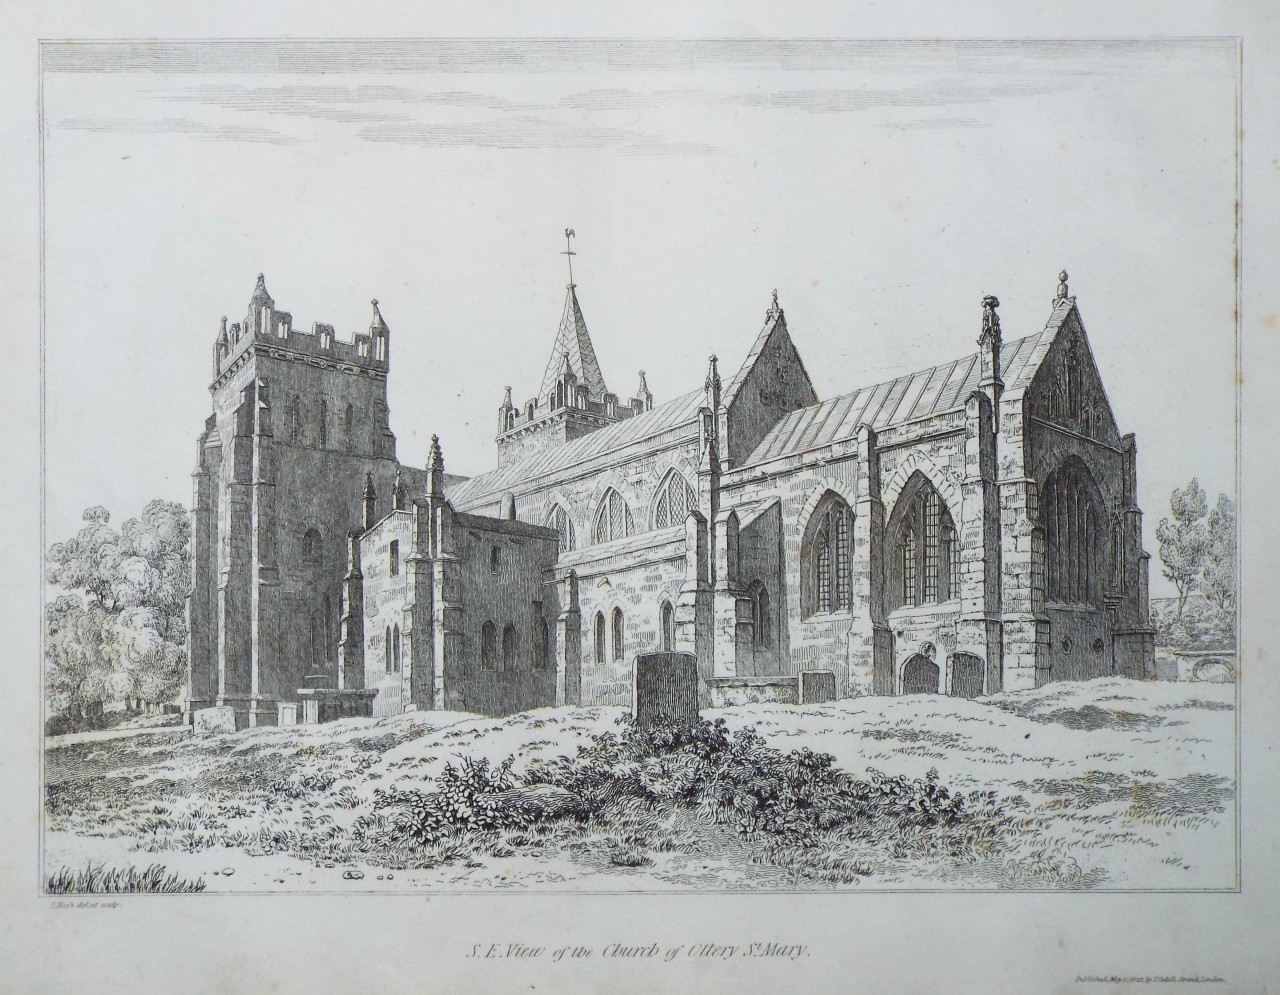 Print - S.E. View of the Church of Ottery St. Mary. - Nash